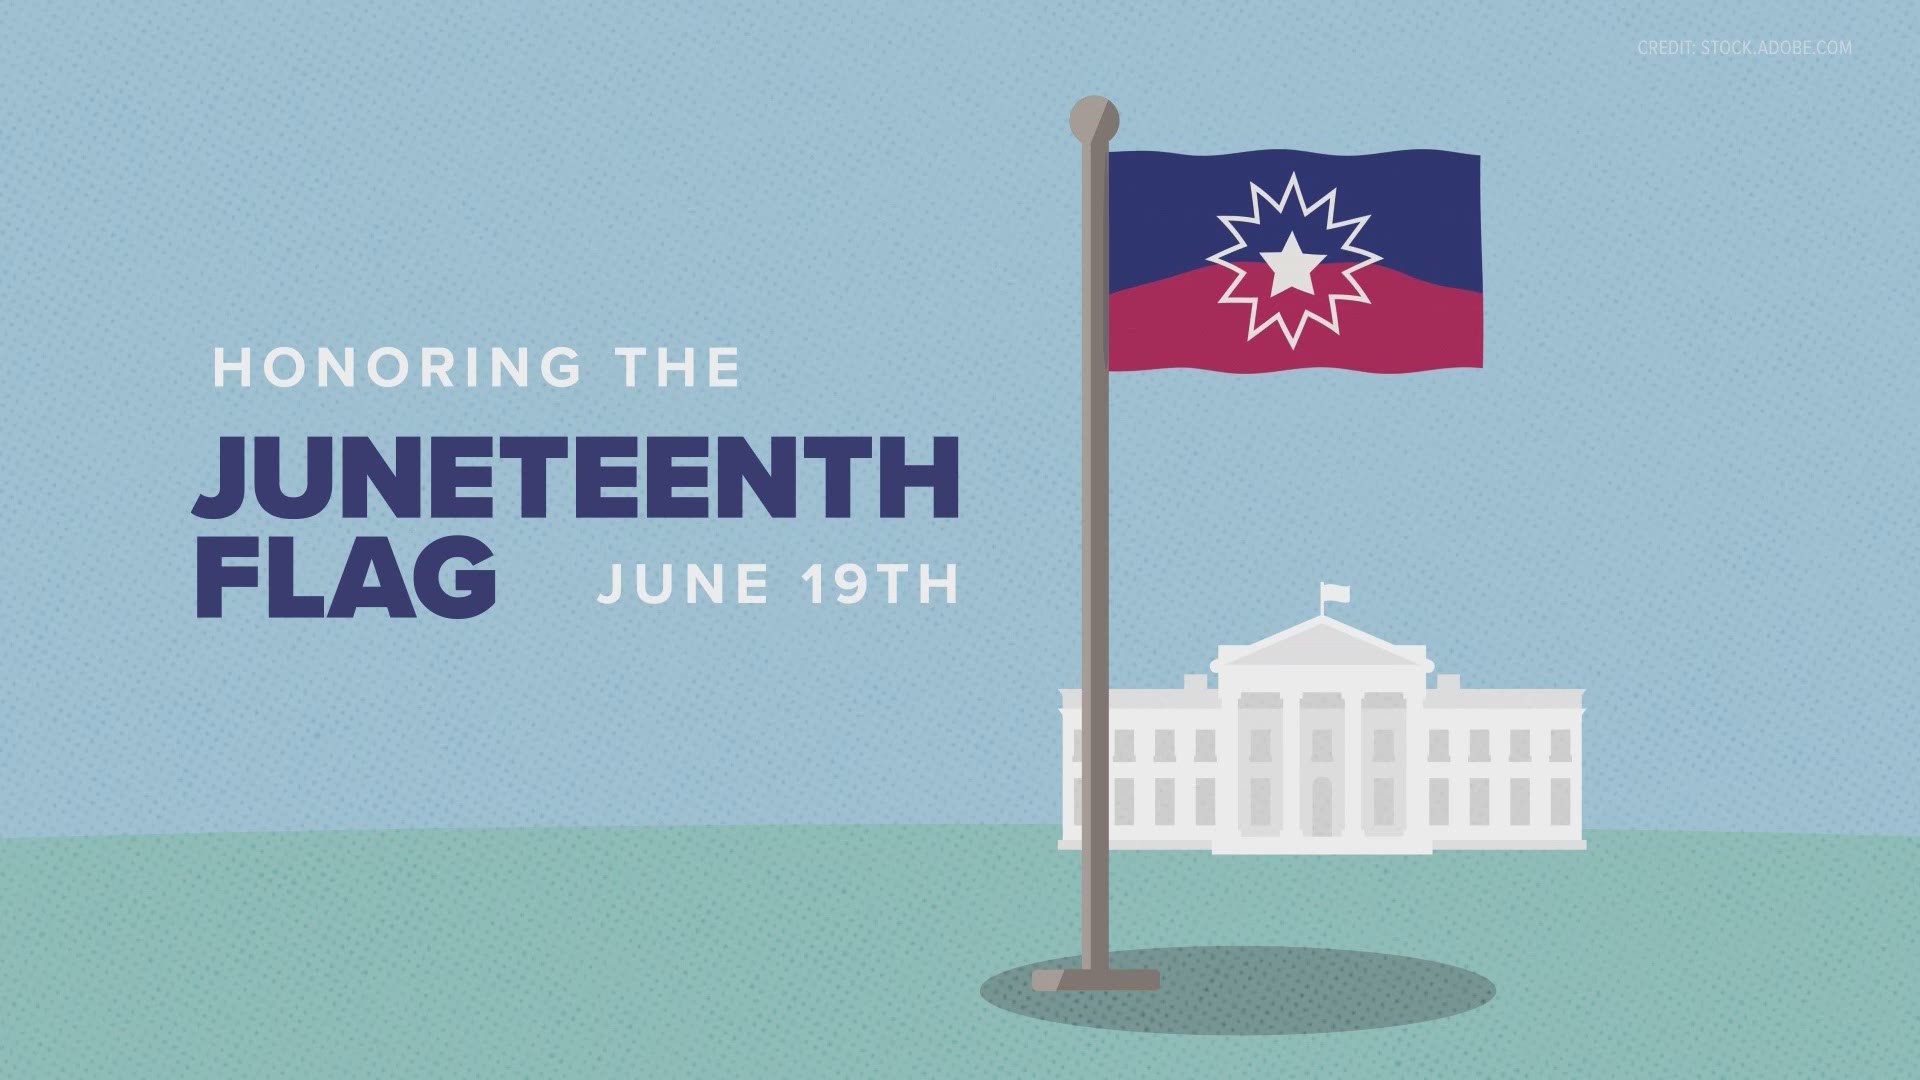 The Juneteenth flag commemorates the day that slavery ended in the US.